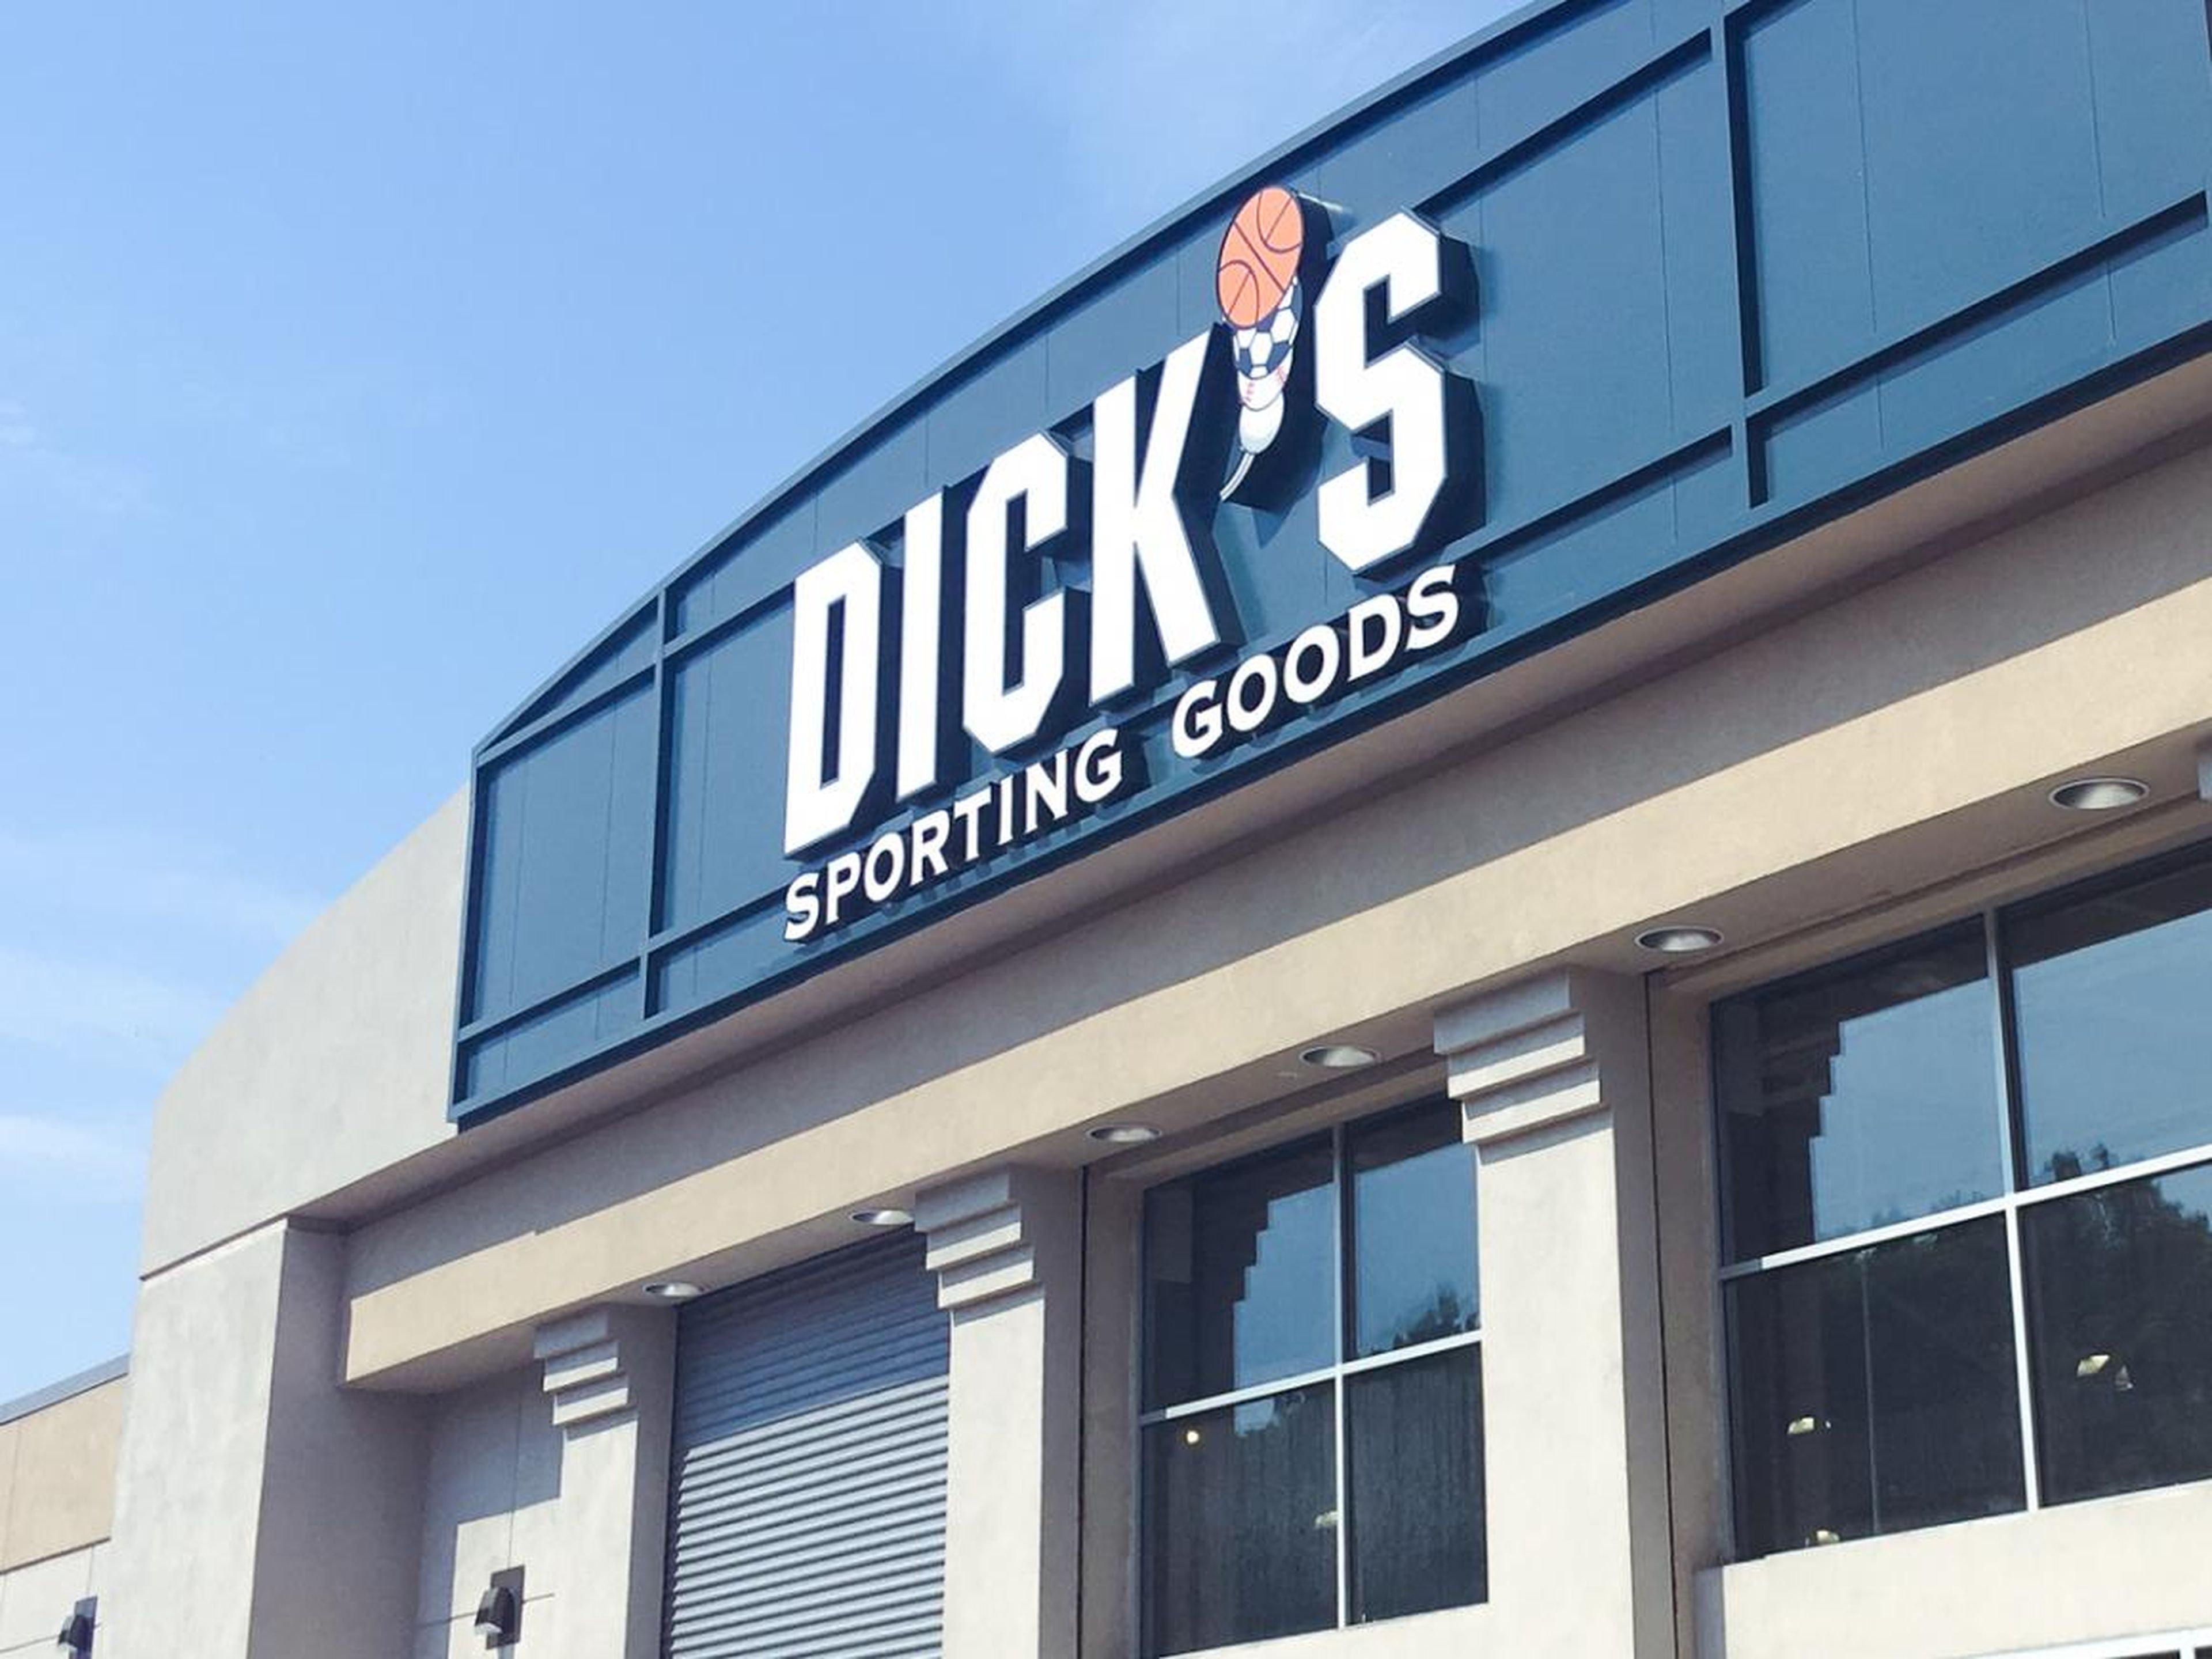 Several retailers use these ad tools, including Macy's and Dick's Sporting Goods.